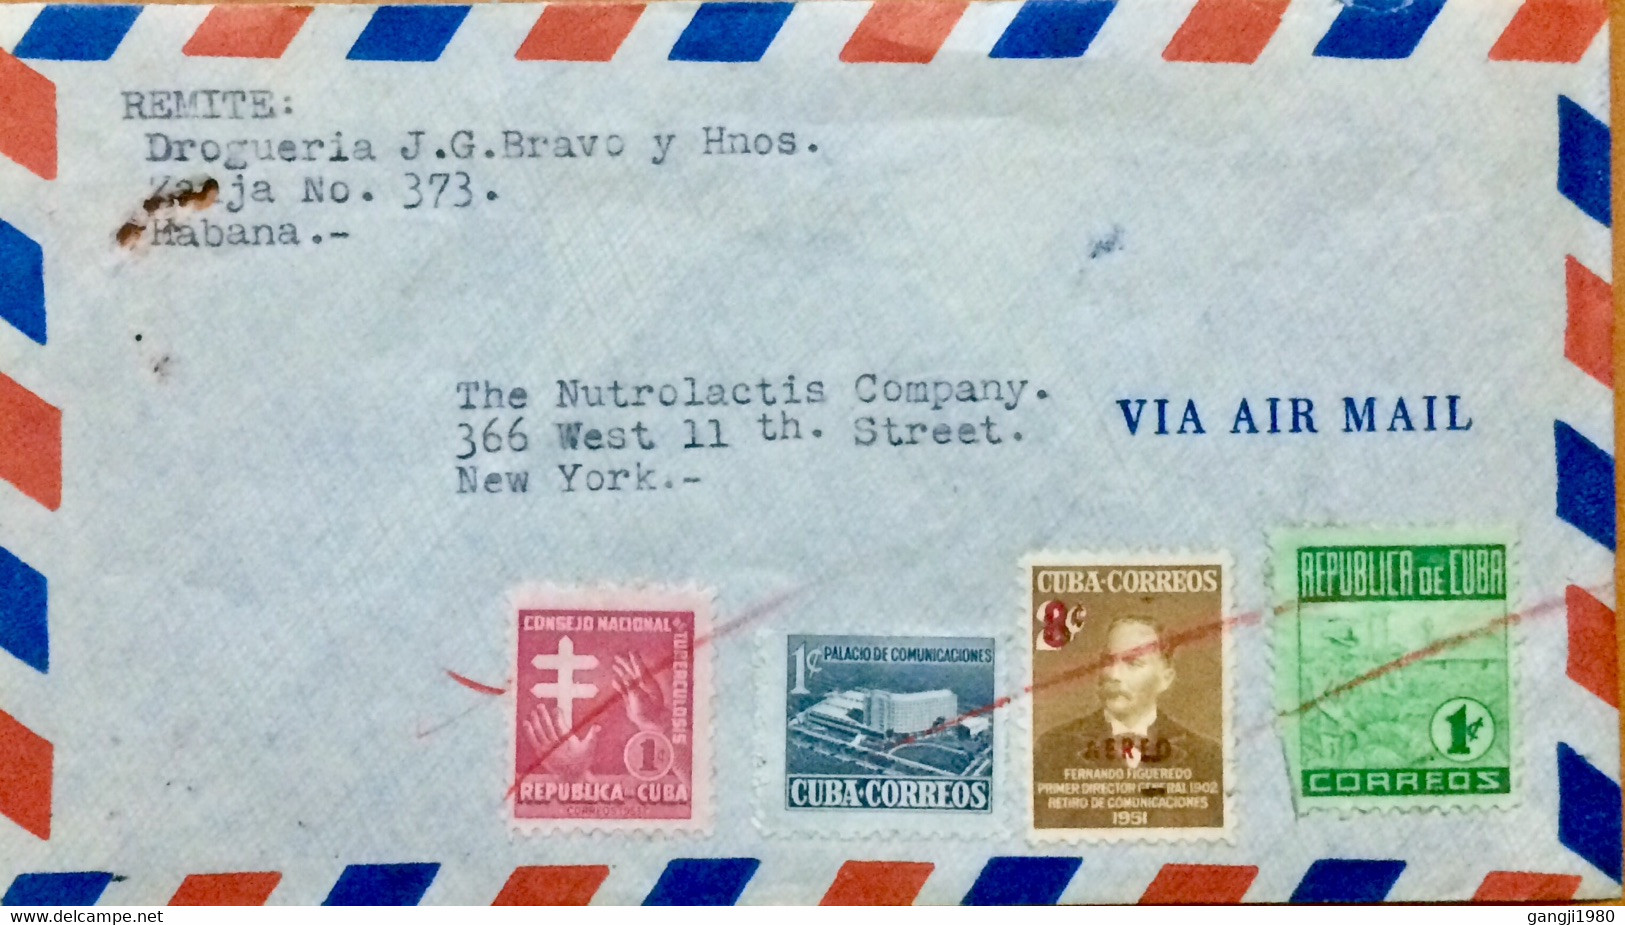 CUBA 1952, COVER USED TO USA, F.FIGUEREDO STAMP OVPTD, POST BUILDING, TOBACCO, TUBERCULOSIS, NEW YORK, OLD CHELSEA STATI - Briefe U. Dokumente